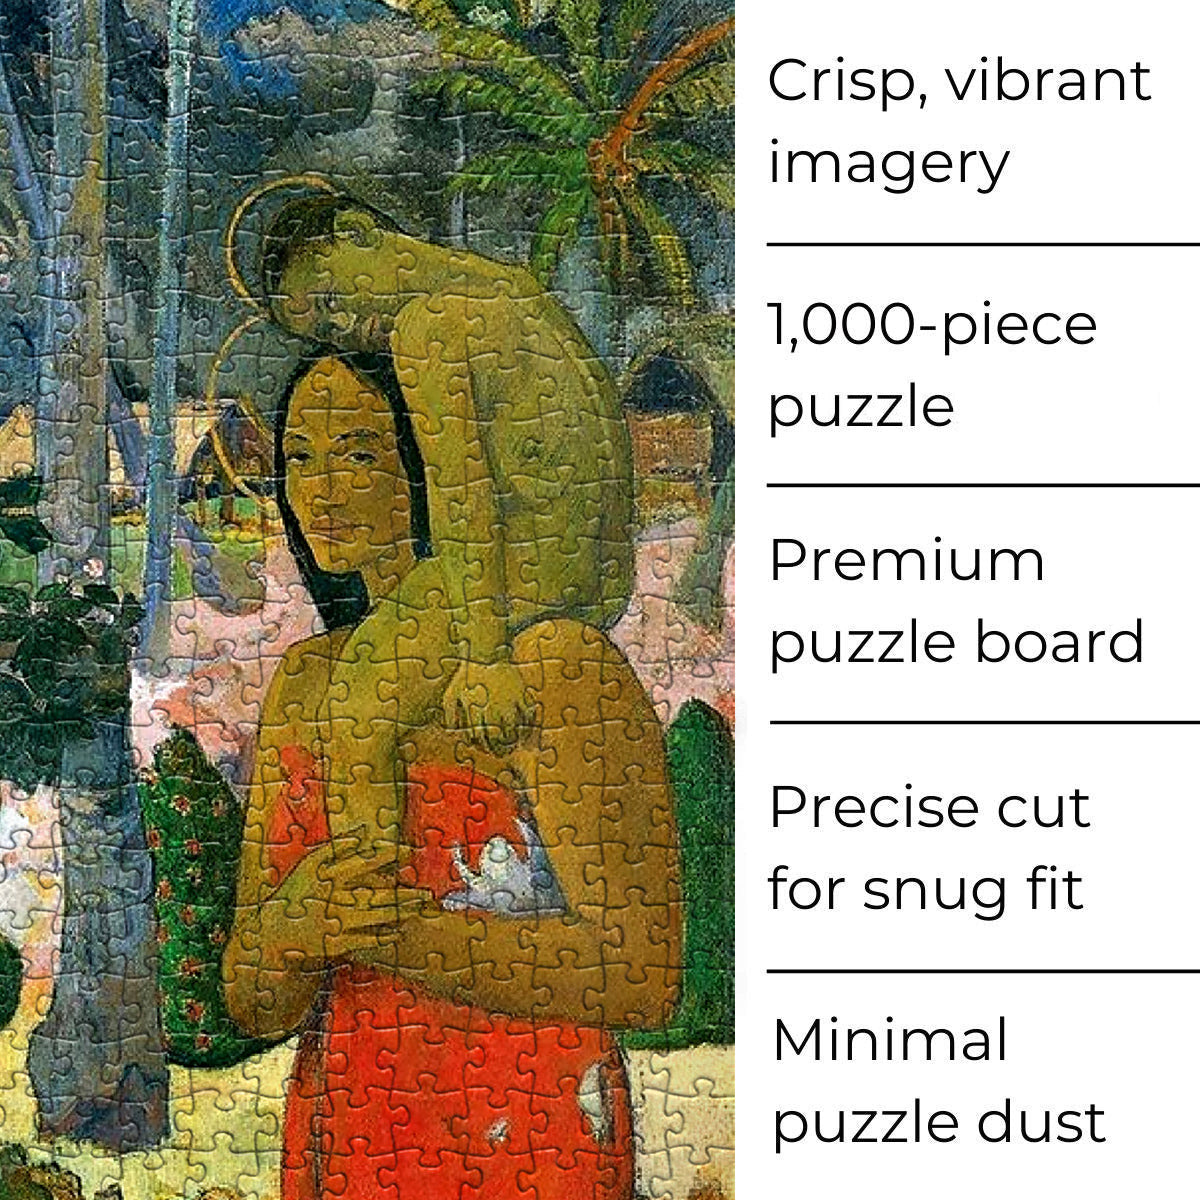 Dive into the world of fine art with this challenging 1000-piece jigsaw puzzle of Paul Gauguin's La Orana Maria.